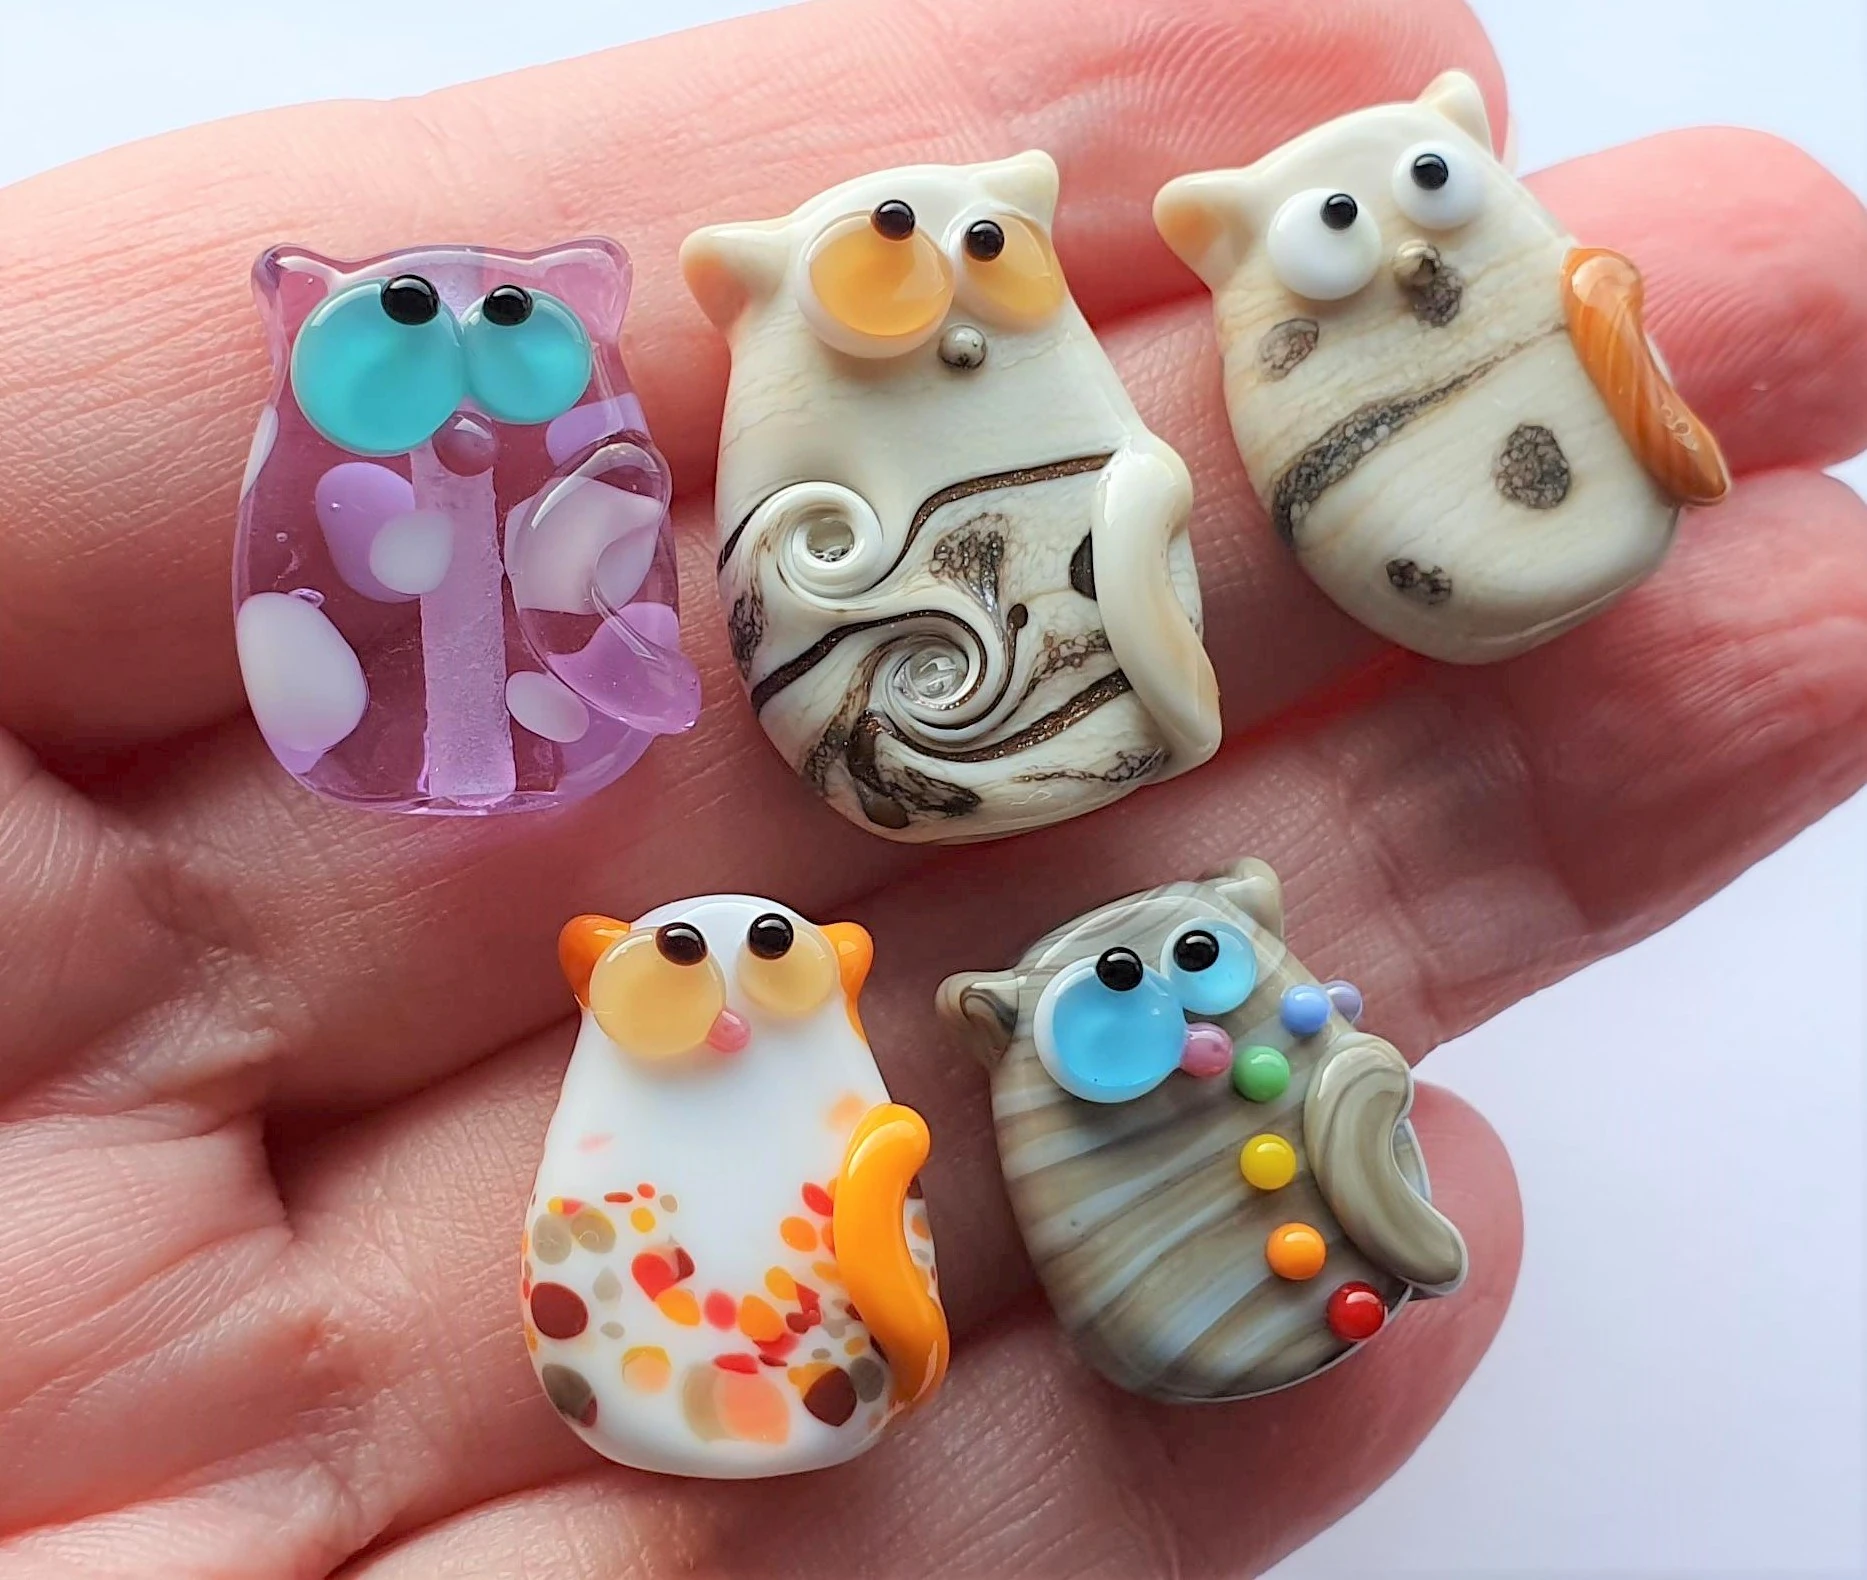 A collection of lampwork glass beads resembling cats of various colors and styles.